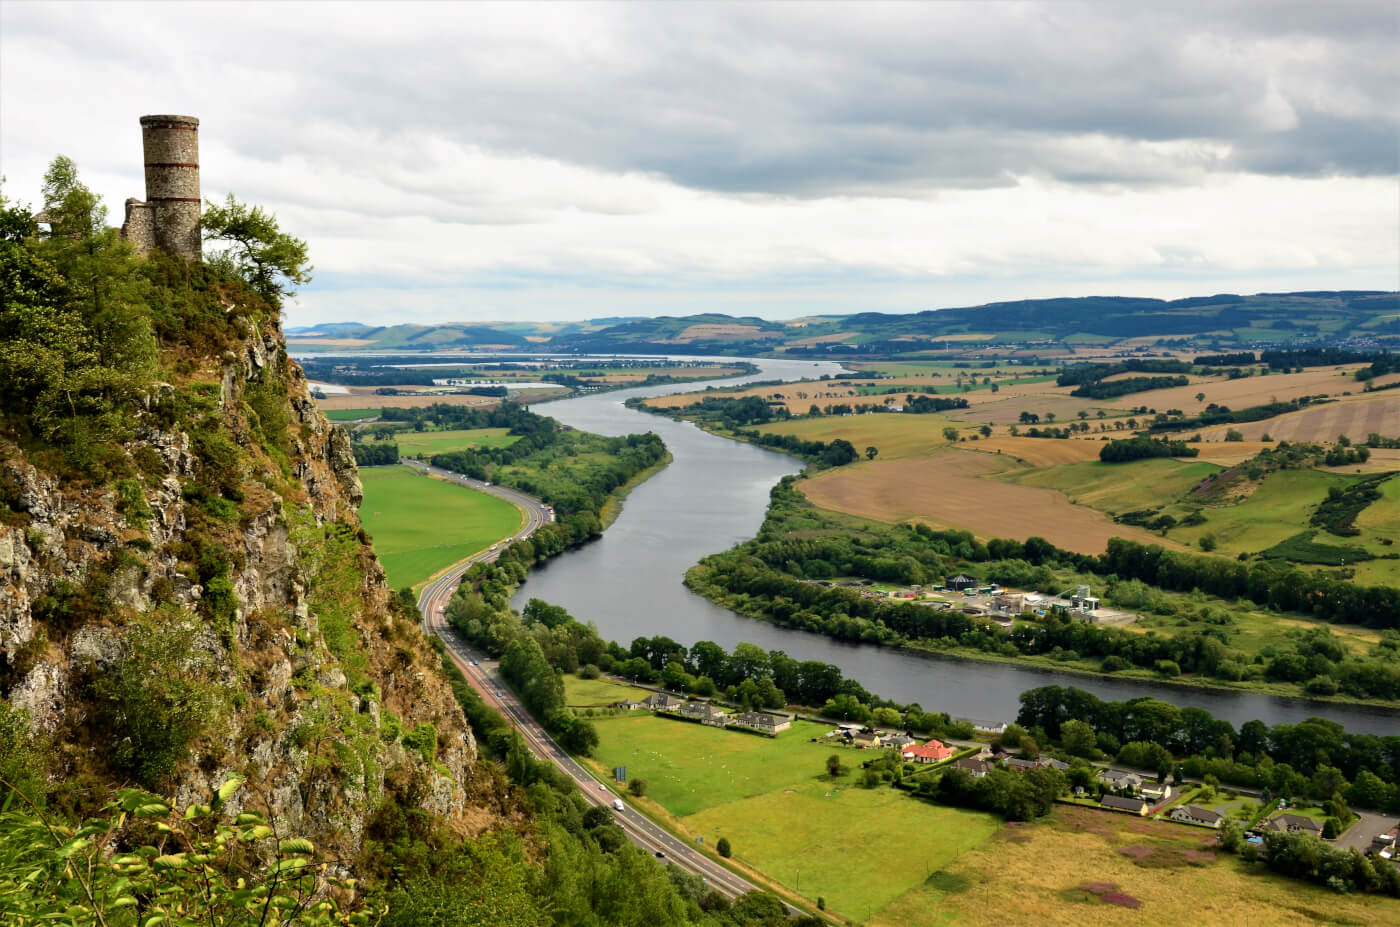 The view of a river and surrounding countryside from Kinoull Hill in Scotland